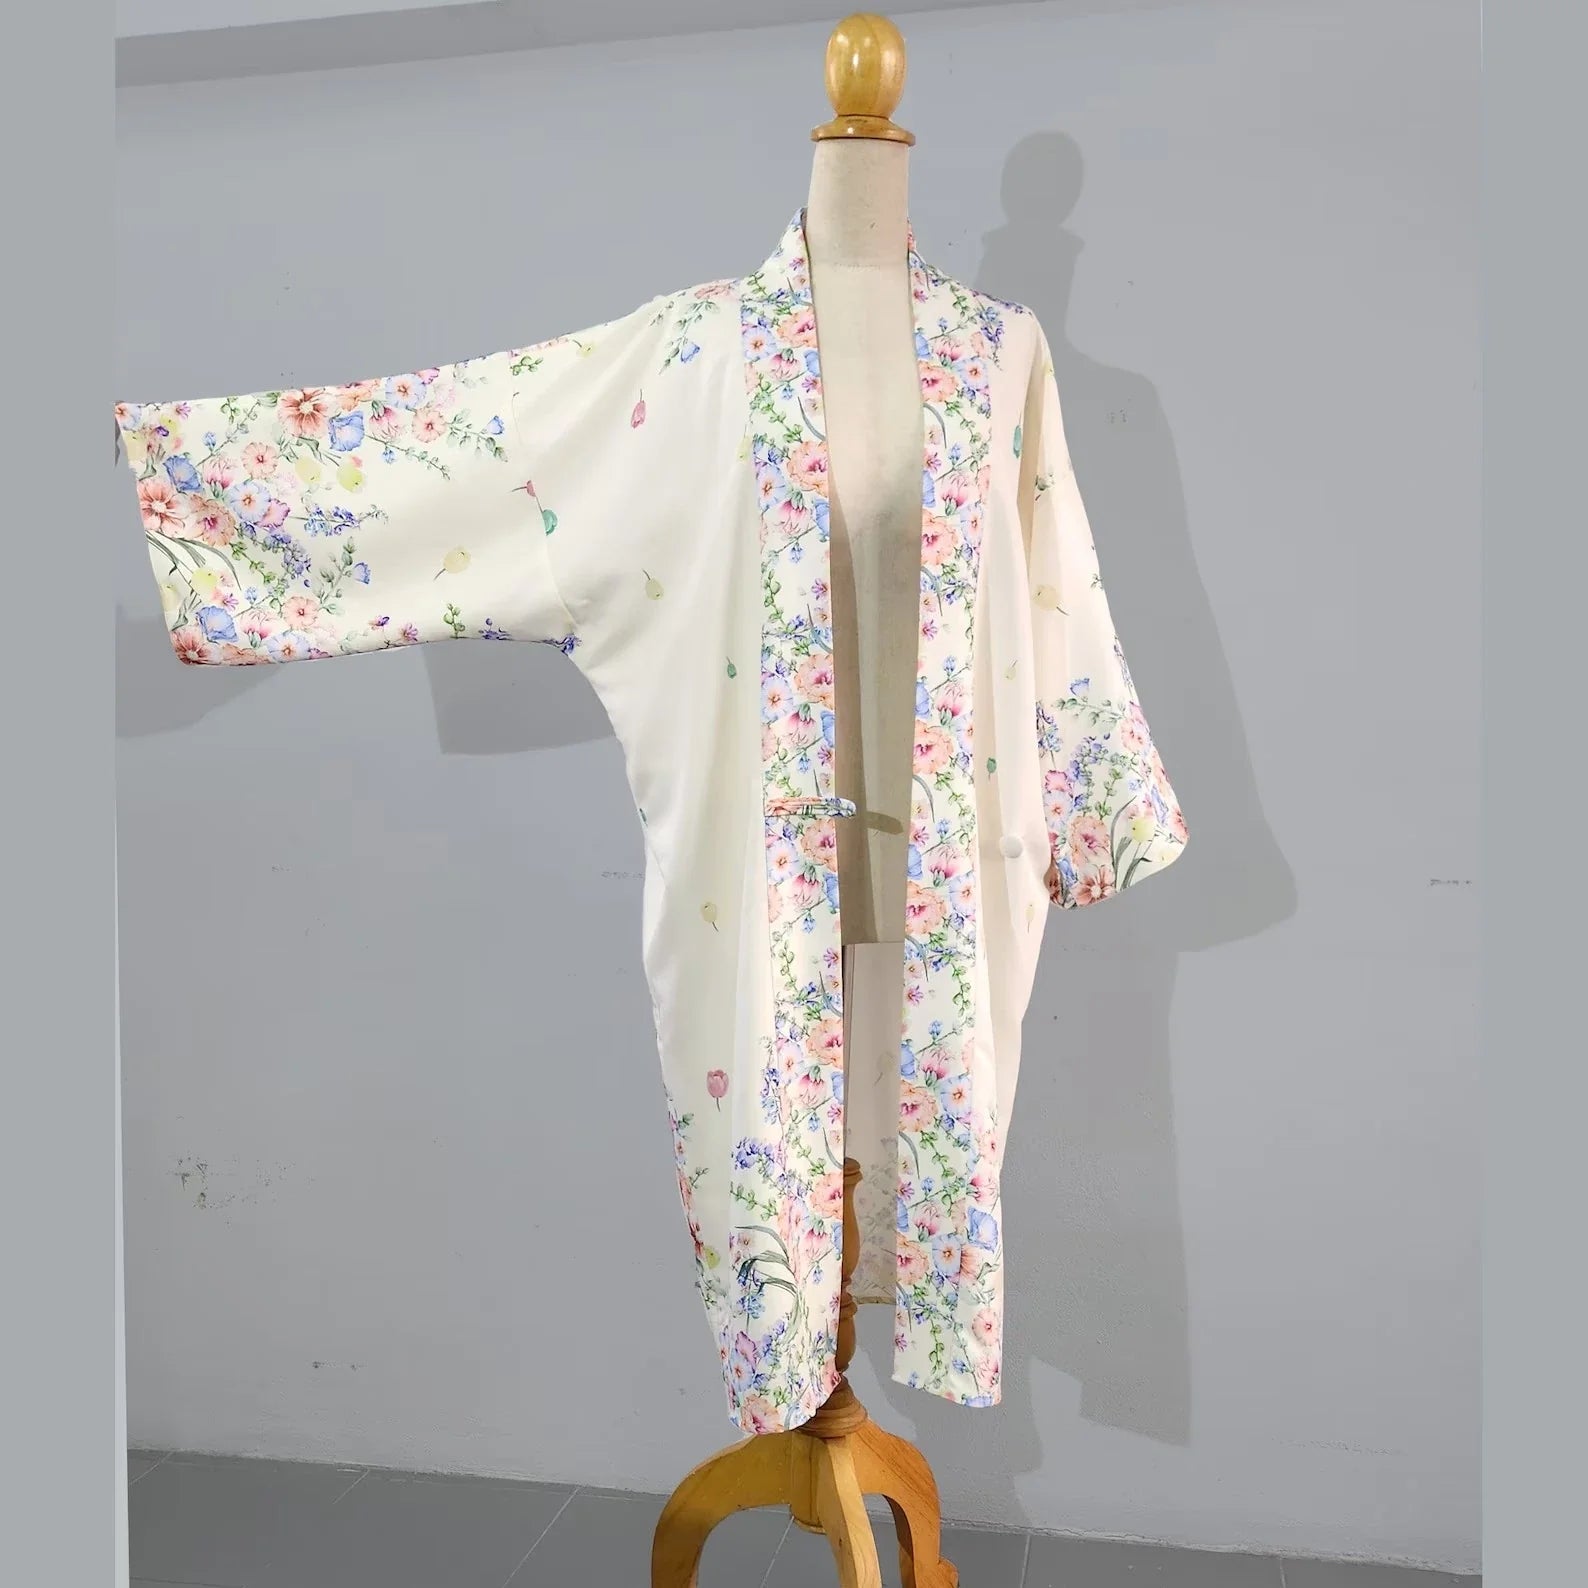 Cream floral oriental kimono robe inspired by 1920s loungewear fashion. The 1920s duster summer coat can be worn as Gatsby robe or 1920s nightgown